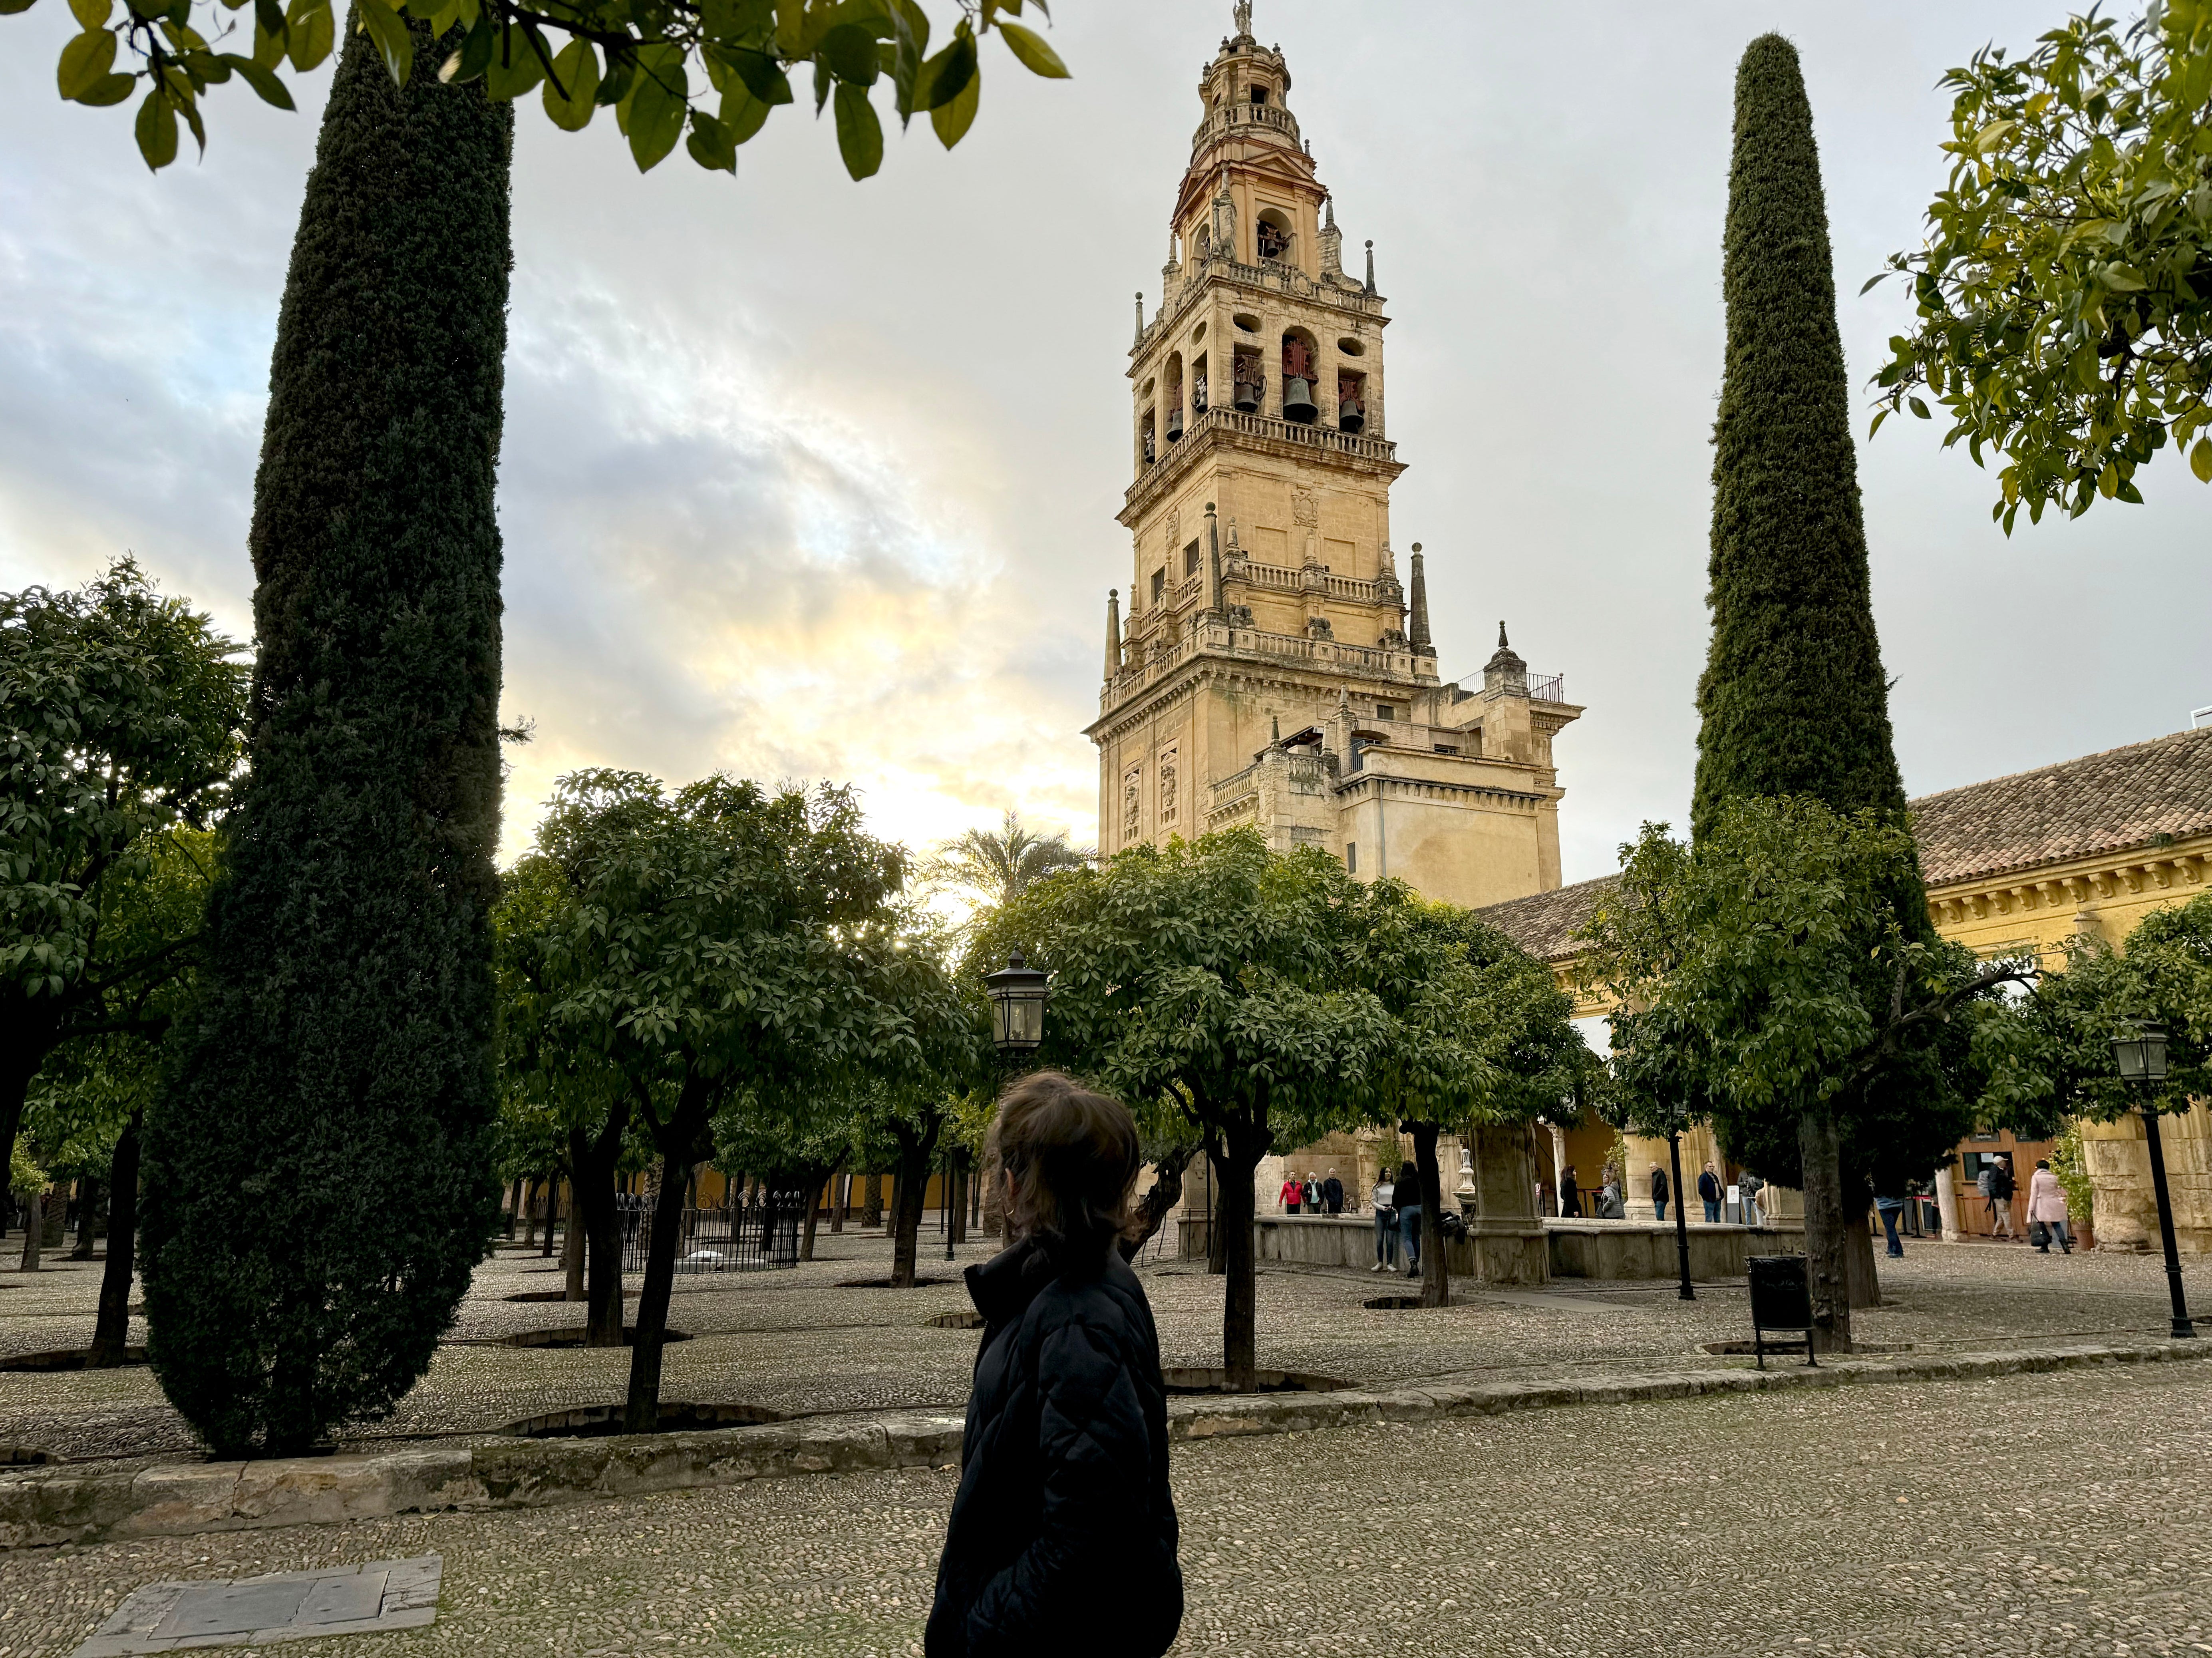 The Mezquita’s minaret became a bell tower after the Reconquista of Spain